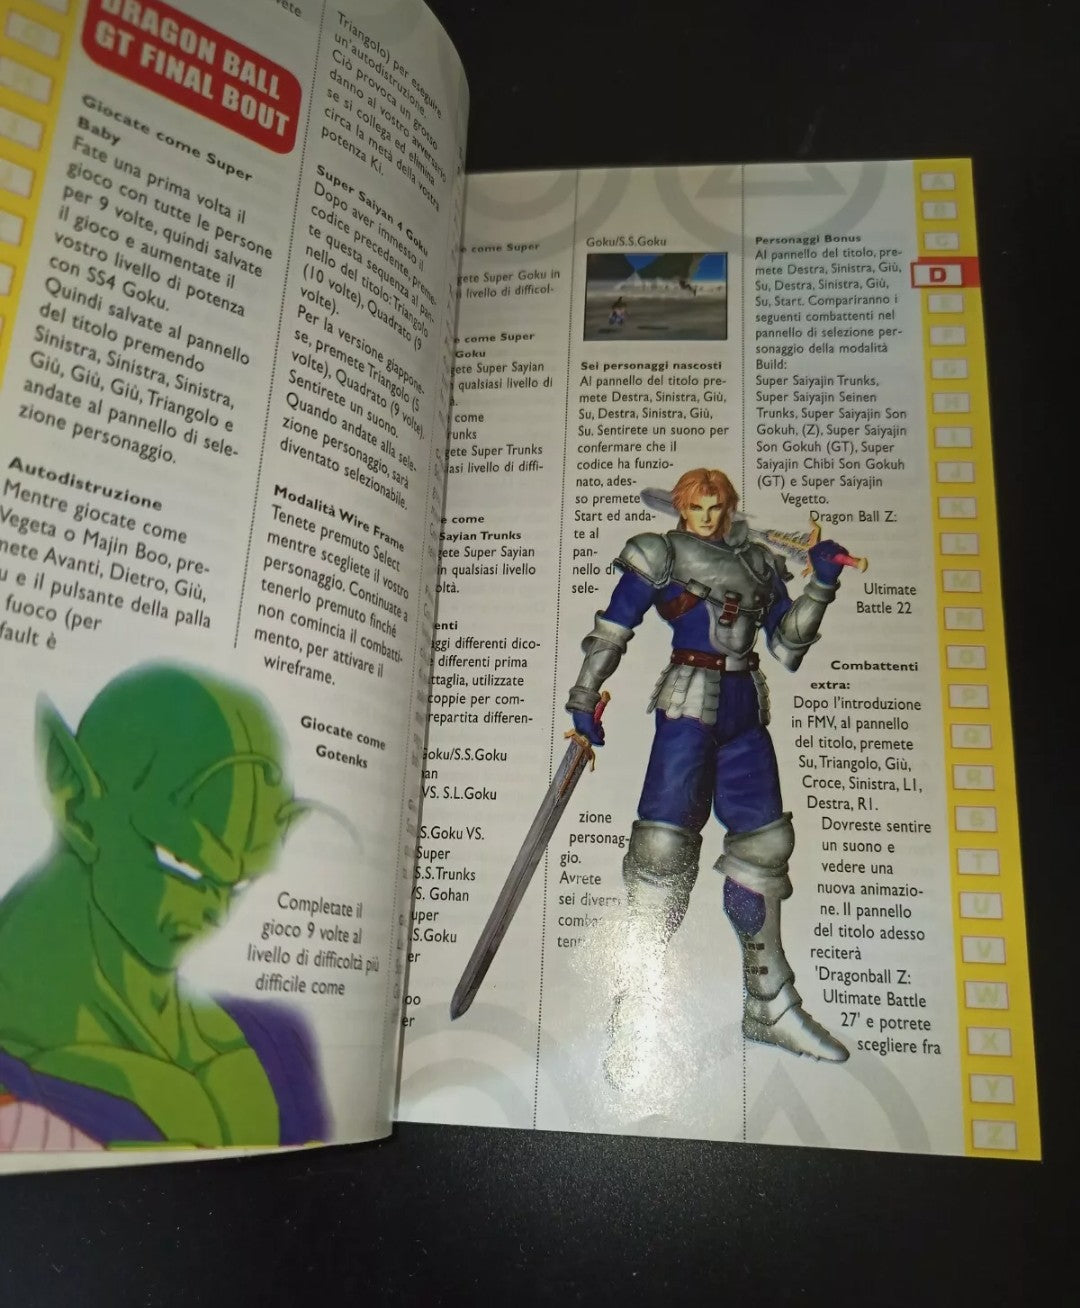 The Playstation 1 Code Book from A to Z